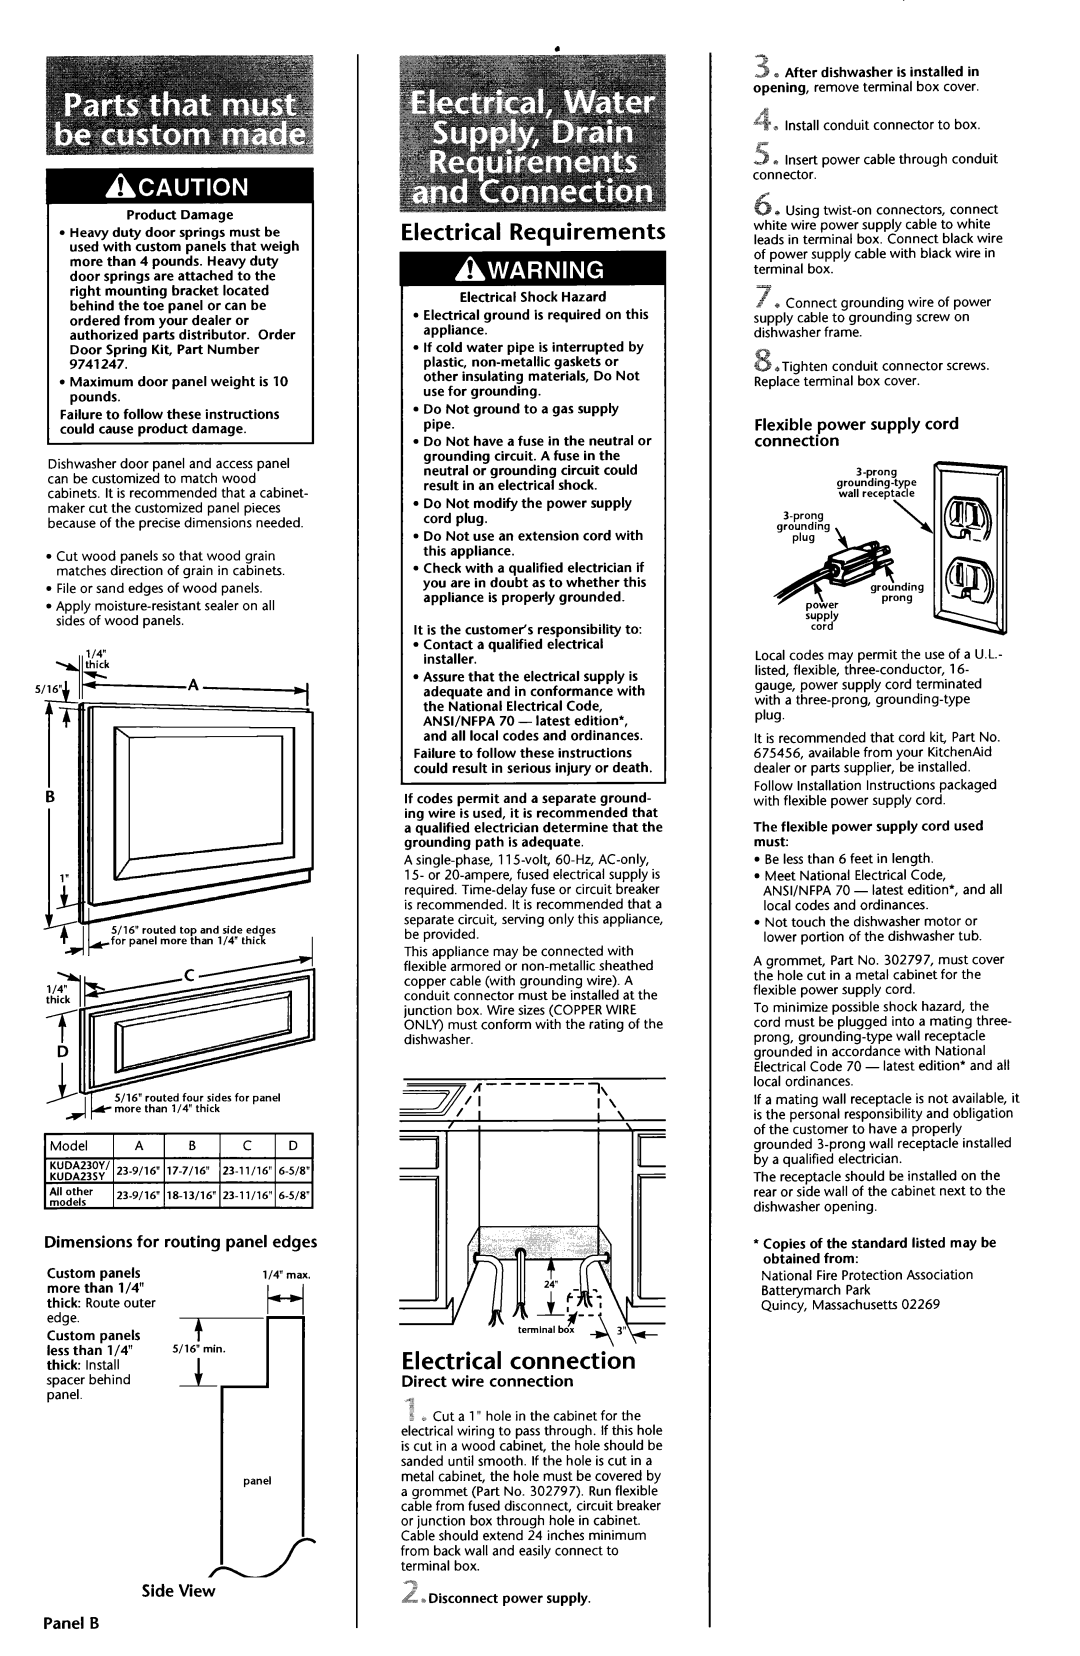 KitchenAid 97415 14 Electrical Requirements, Electrical connection, Dimensions for routing panel edges, Side View, Panel B 